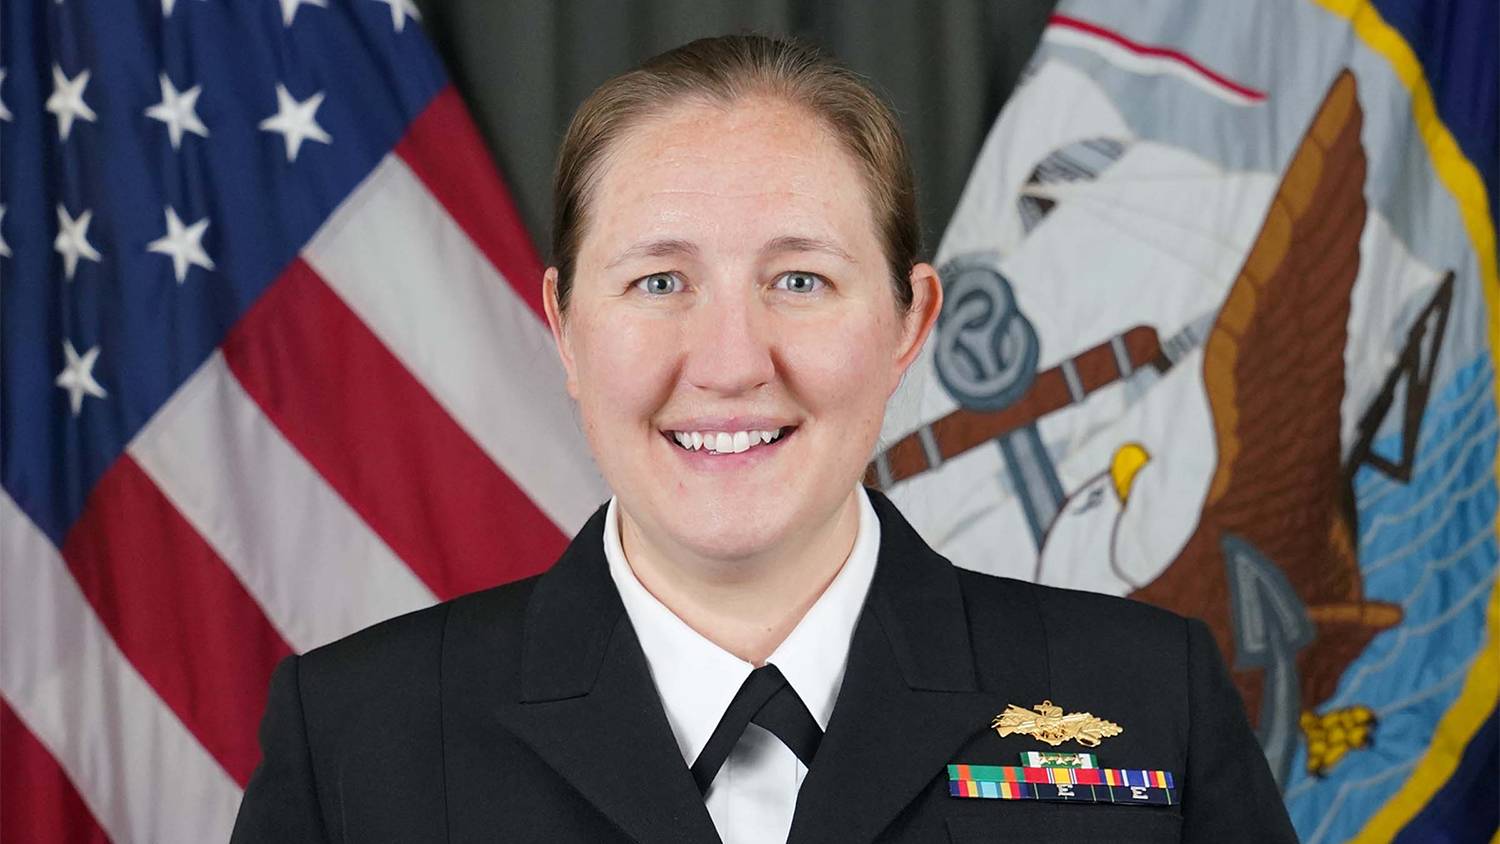 Genevieve Flatgard poses for a portrait while wearing her military uniform. The United States flag, left, and the United States Navy flag, right, are behind her.